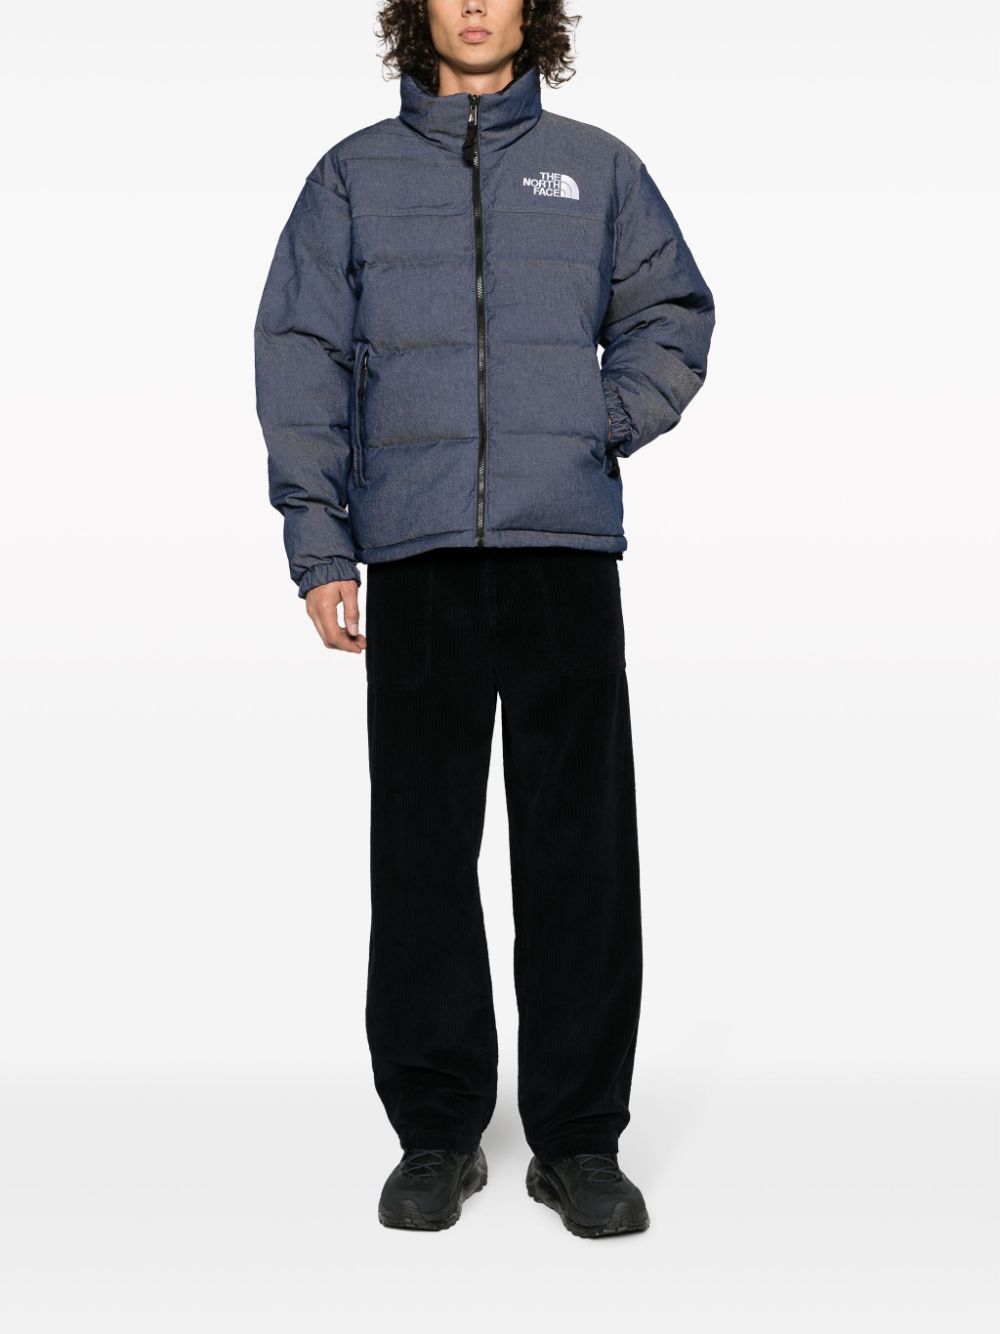 The North Face 1992 Nuptse Reversible Padded Jacket - Farfetch